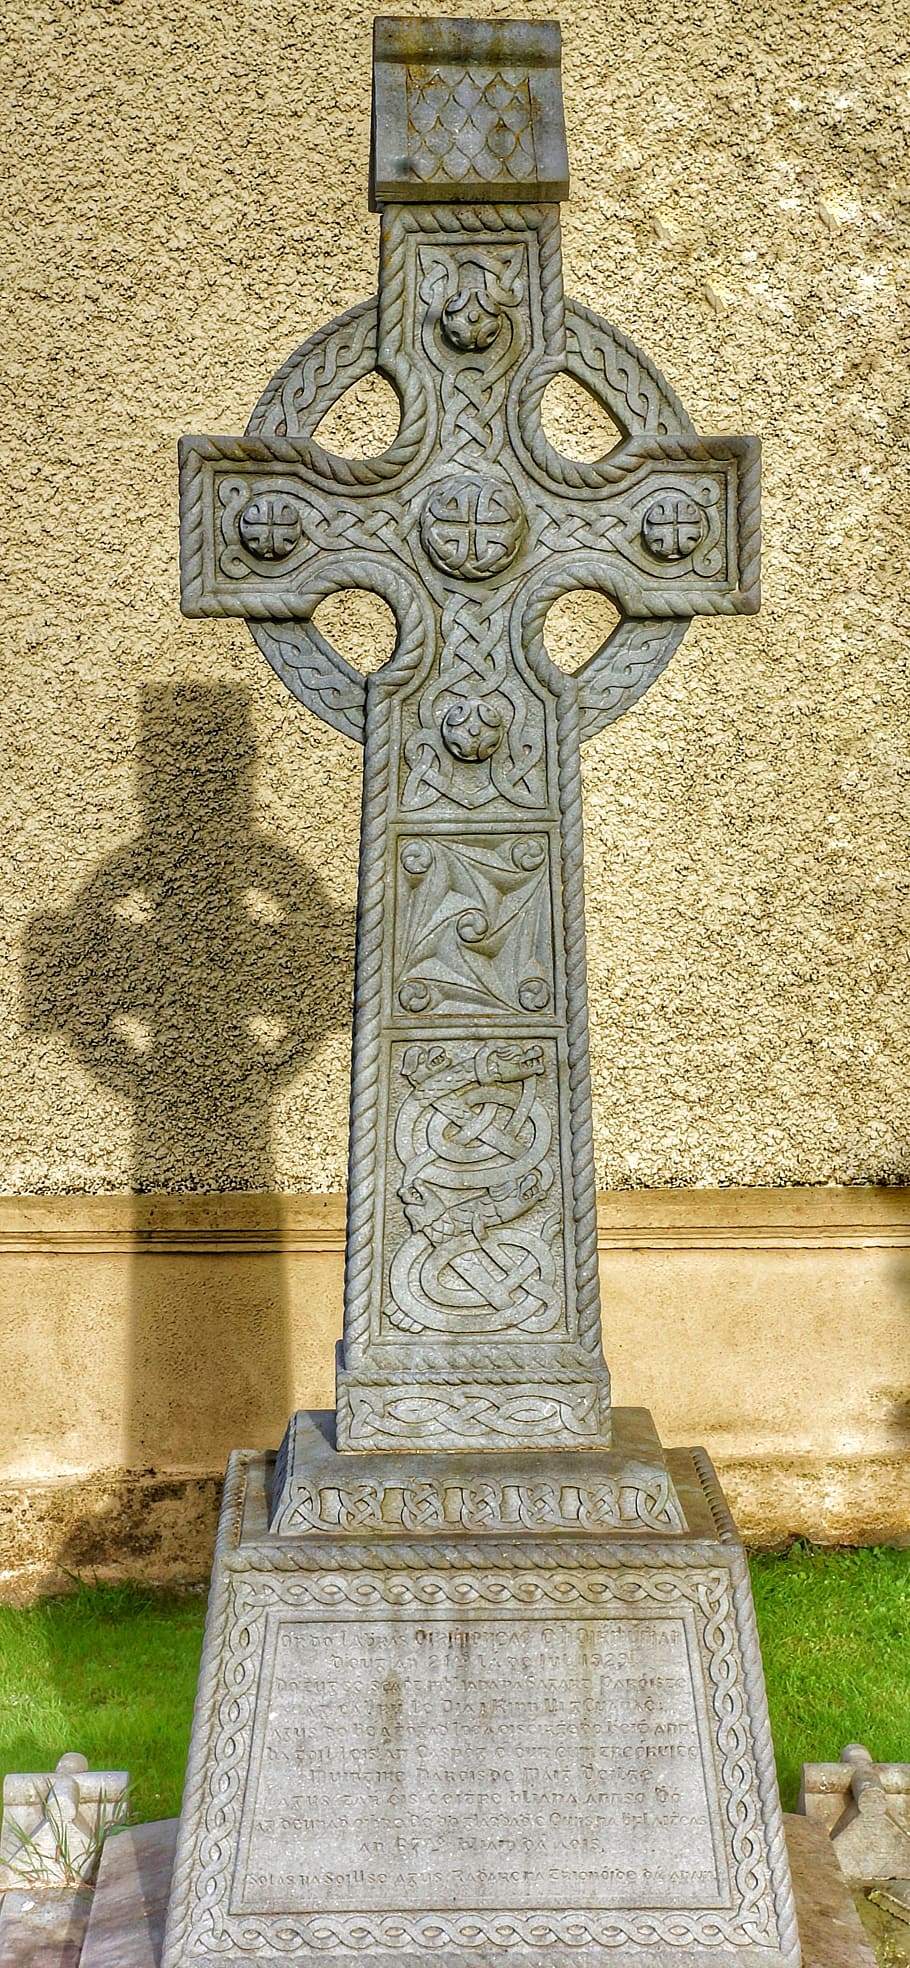 celtic, cross, headstone, grave, cemetery, ireland, art and craft, architecture, sculpture, low angle view